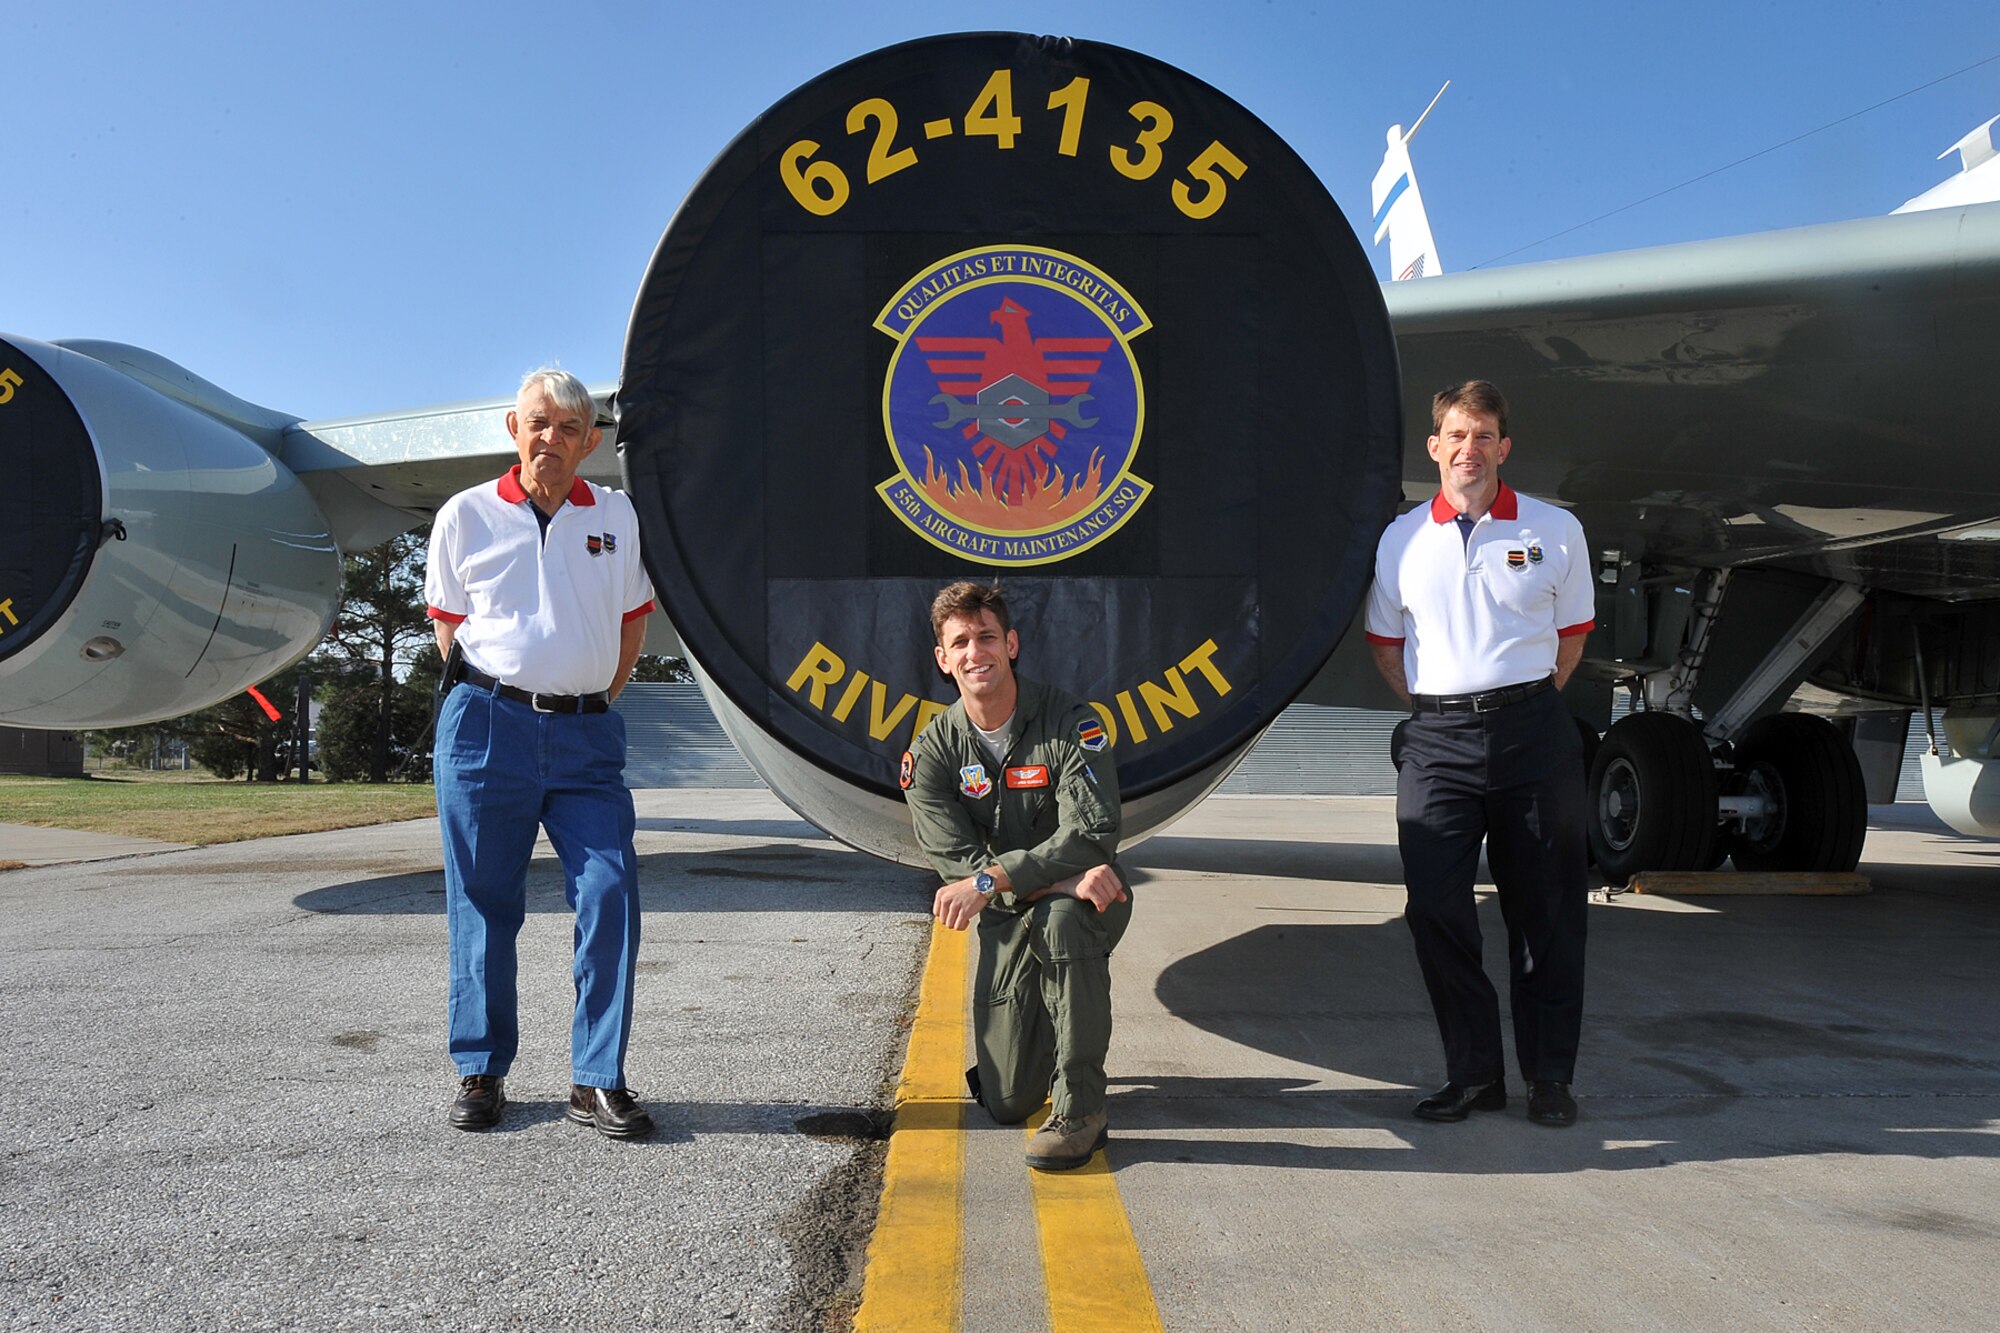 The Eldridge family, retired U.S. Air Force Lt. Col. Golda T. Eldridge Sr. (Left), U.S. Air Force 1st Lt. Joshua Eldridge (Center) and retired U.S. Air Force Lt. Col. Golda T. Eldridge Jr. (Right) stand next to an RC-135V/W Rivet Joint. The Eldridge family is the first to have a third generation pilot become part of the 55th Wing at Offutt Air Force Base.